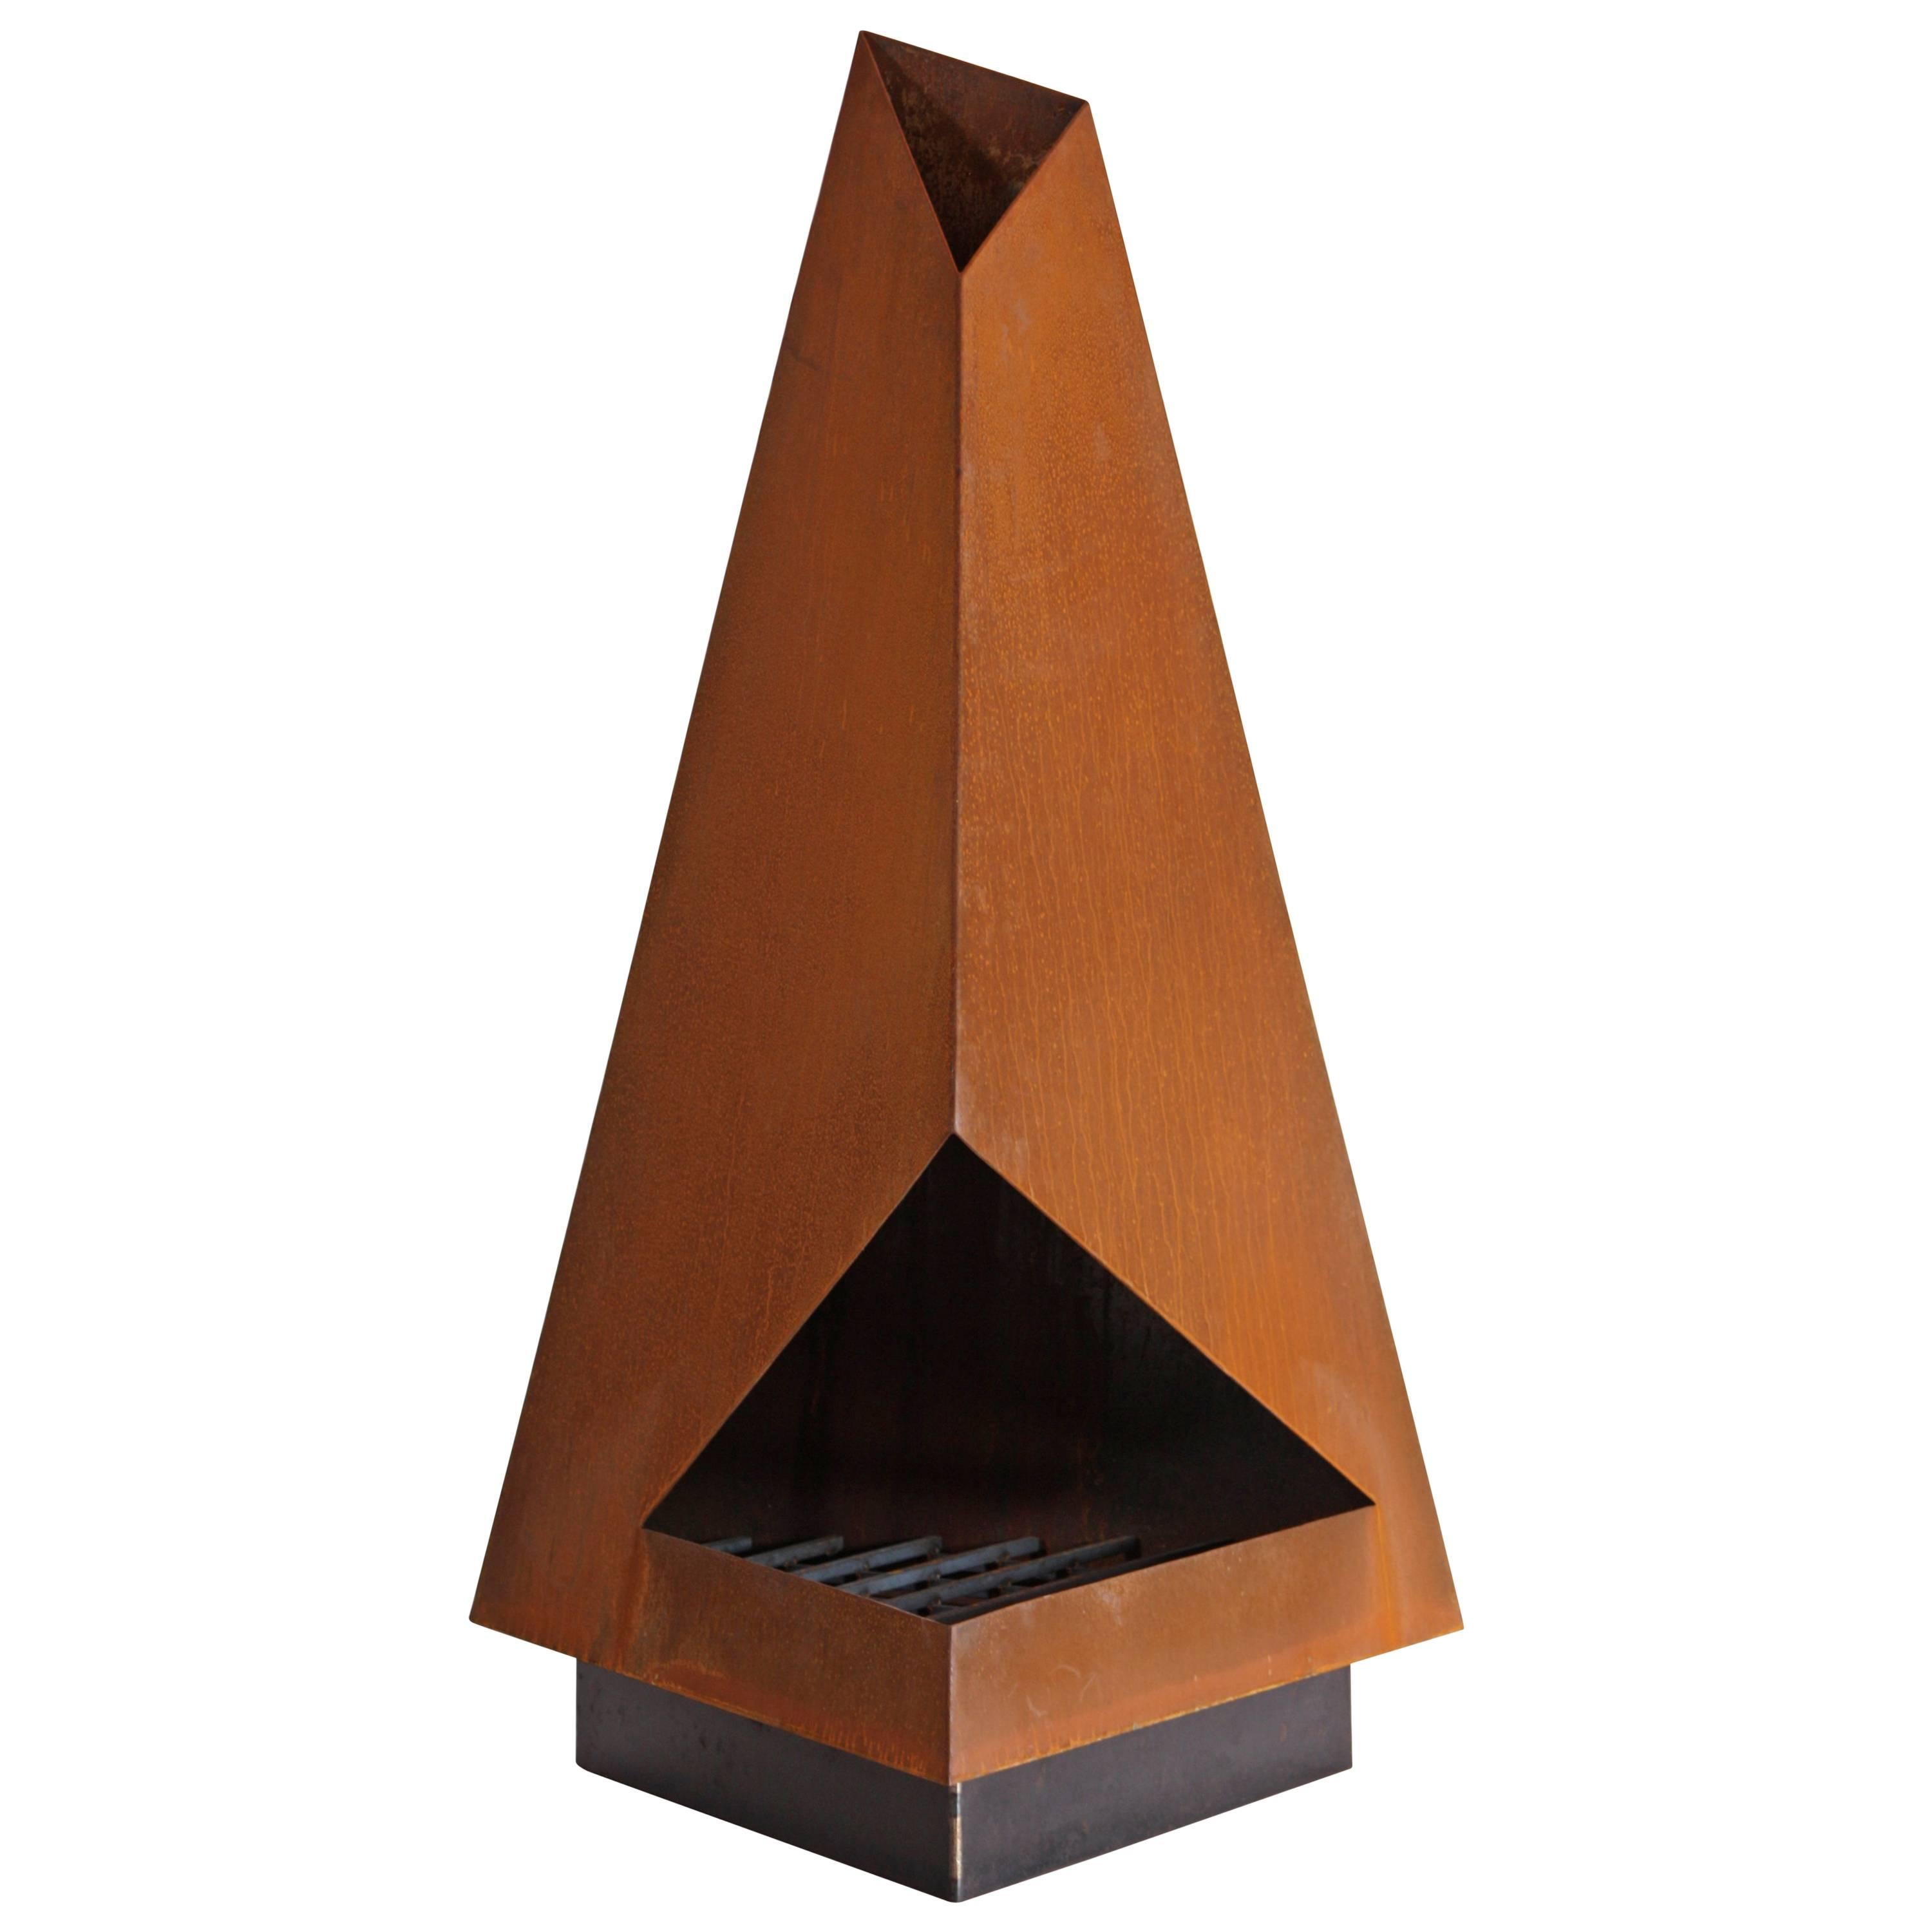 The Theee by Space 20th Century Modern a Steel Outdoor Chiminea Fireplace